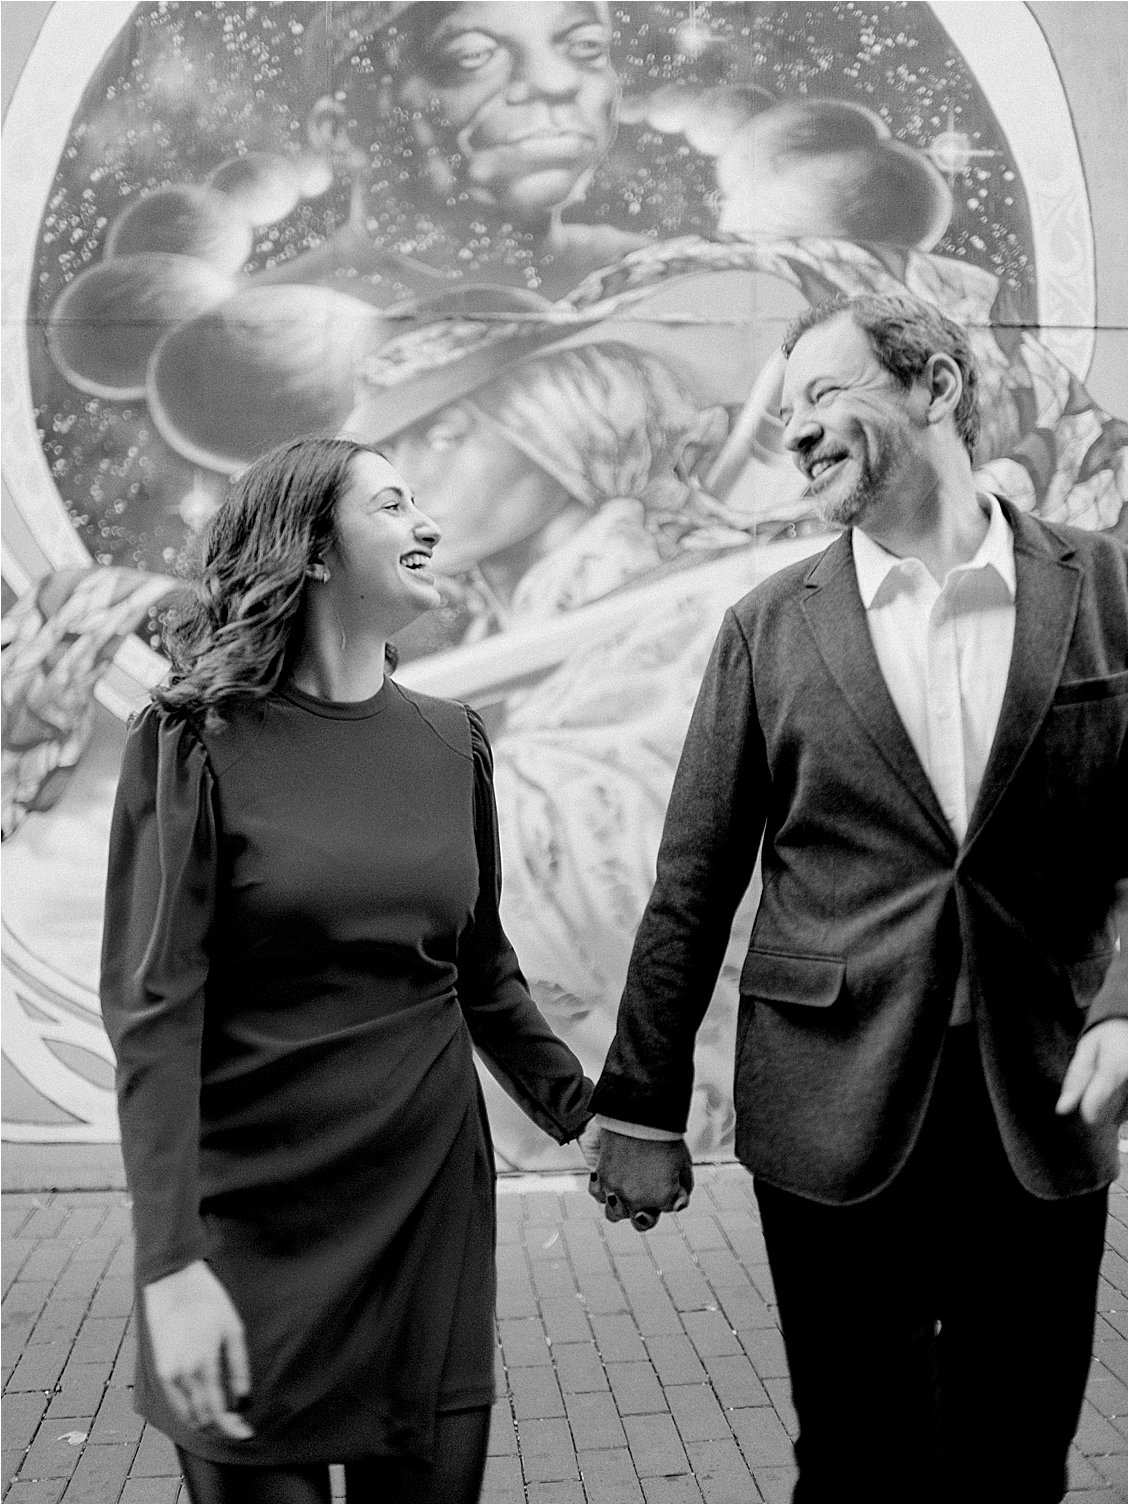 Playful DC Alley Engagement Session with DC Wedding Photographer, Renee Hollingshead